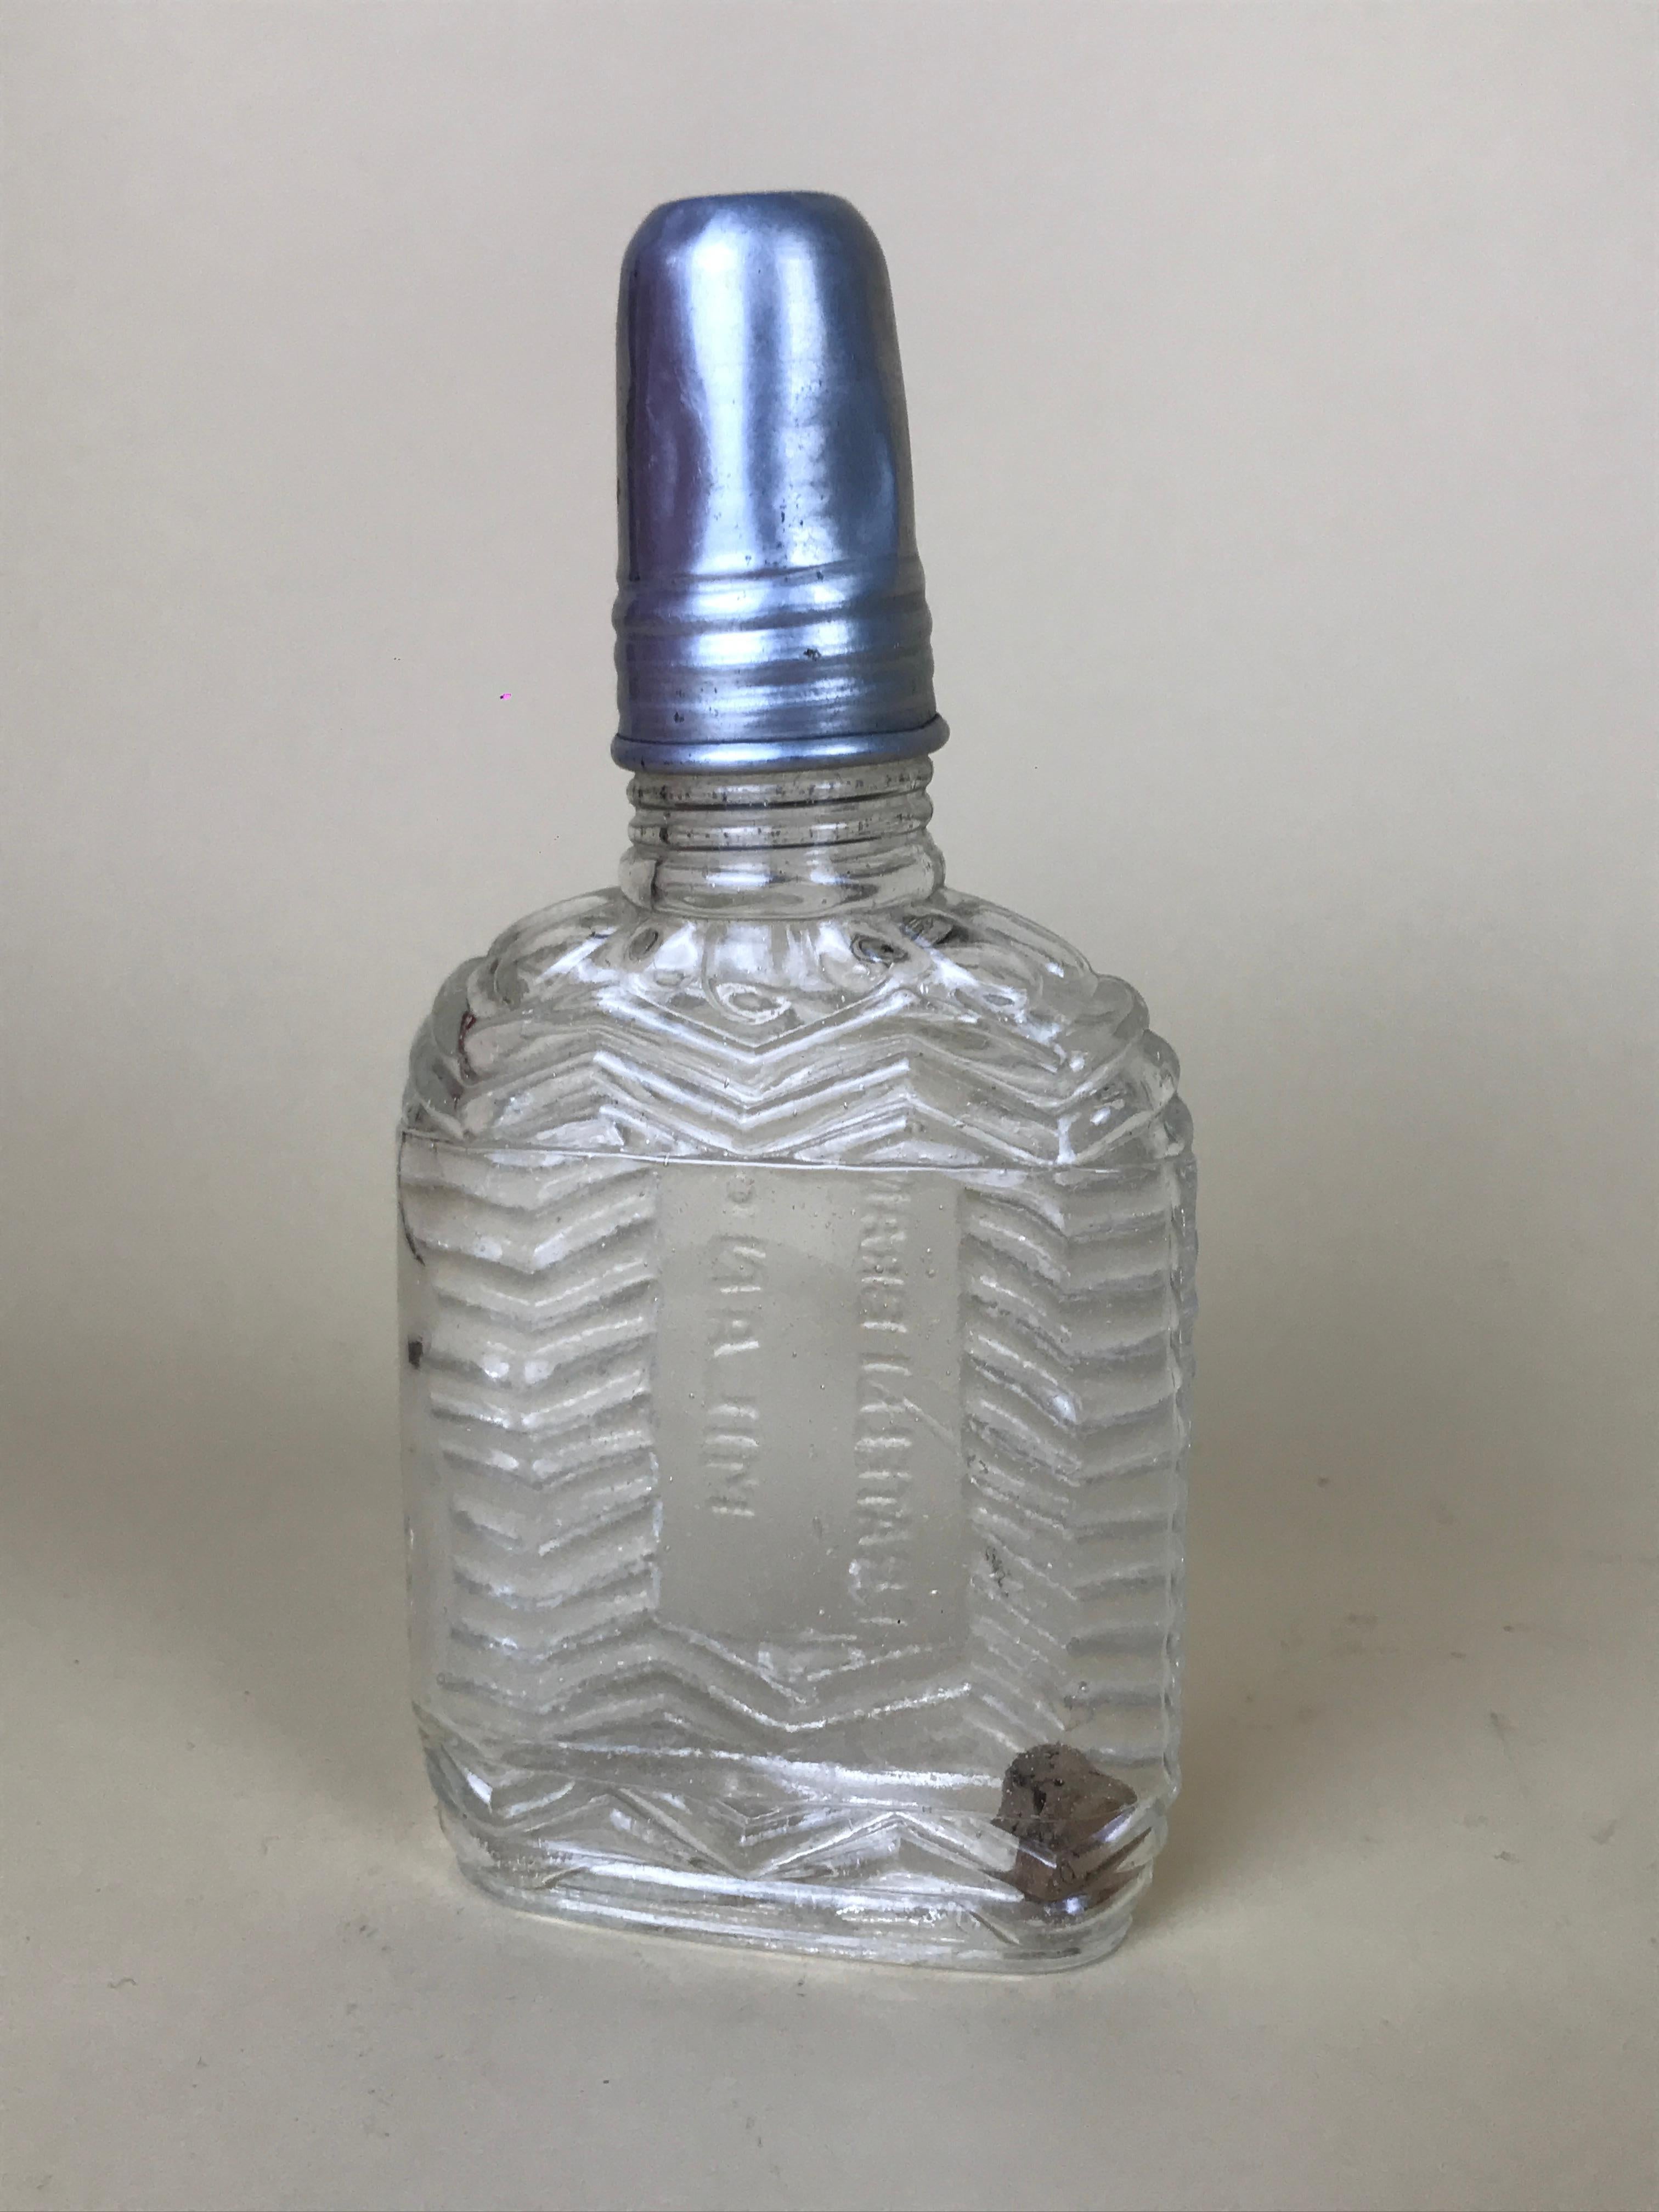 1950s Rare Vintage Italian Fratelli Branca Milano Glass Flask with Aluminium Cup For Sale 1